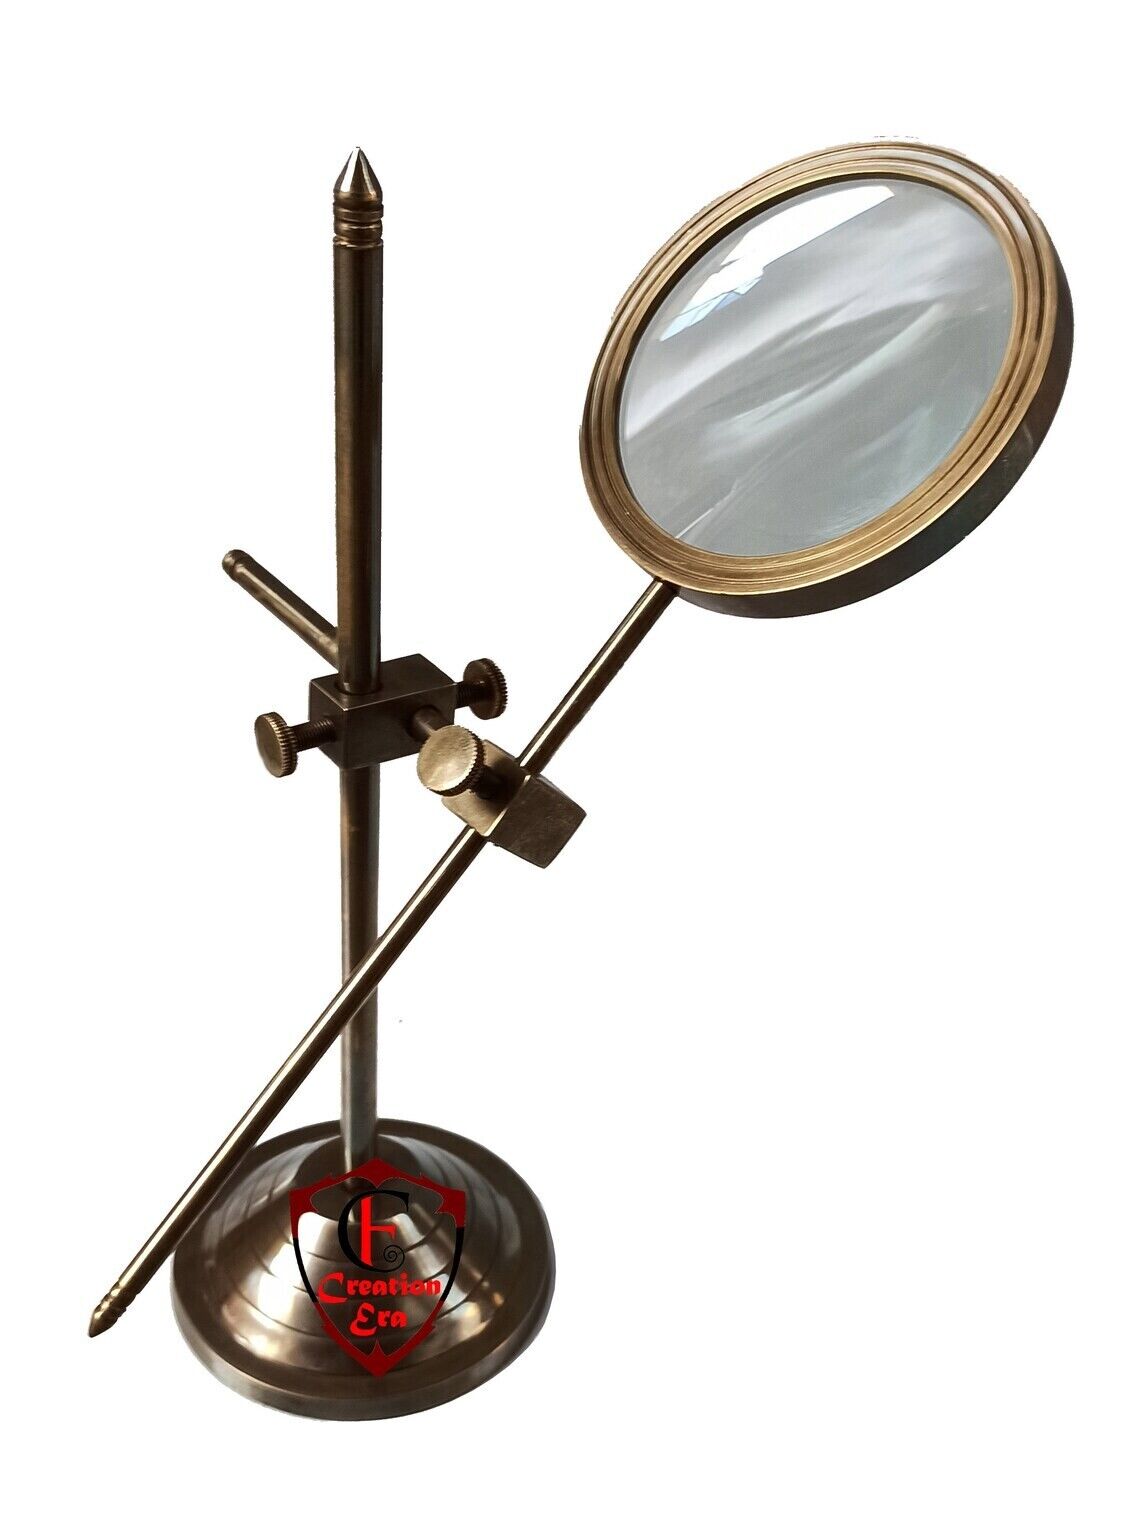 Maritime stand Magnifying Glass, Brass Magnifier, Desk Top/ Table Top Décor Home